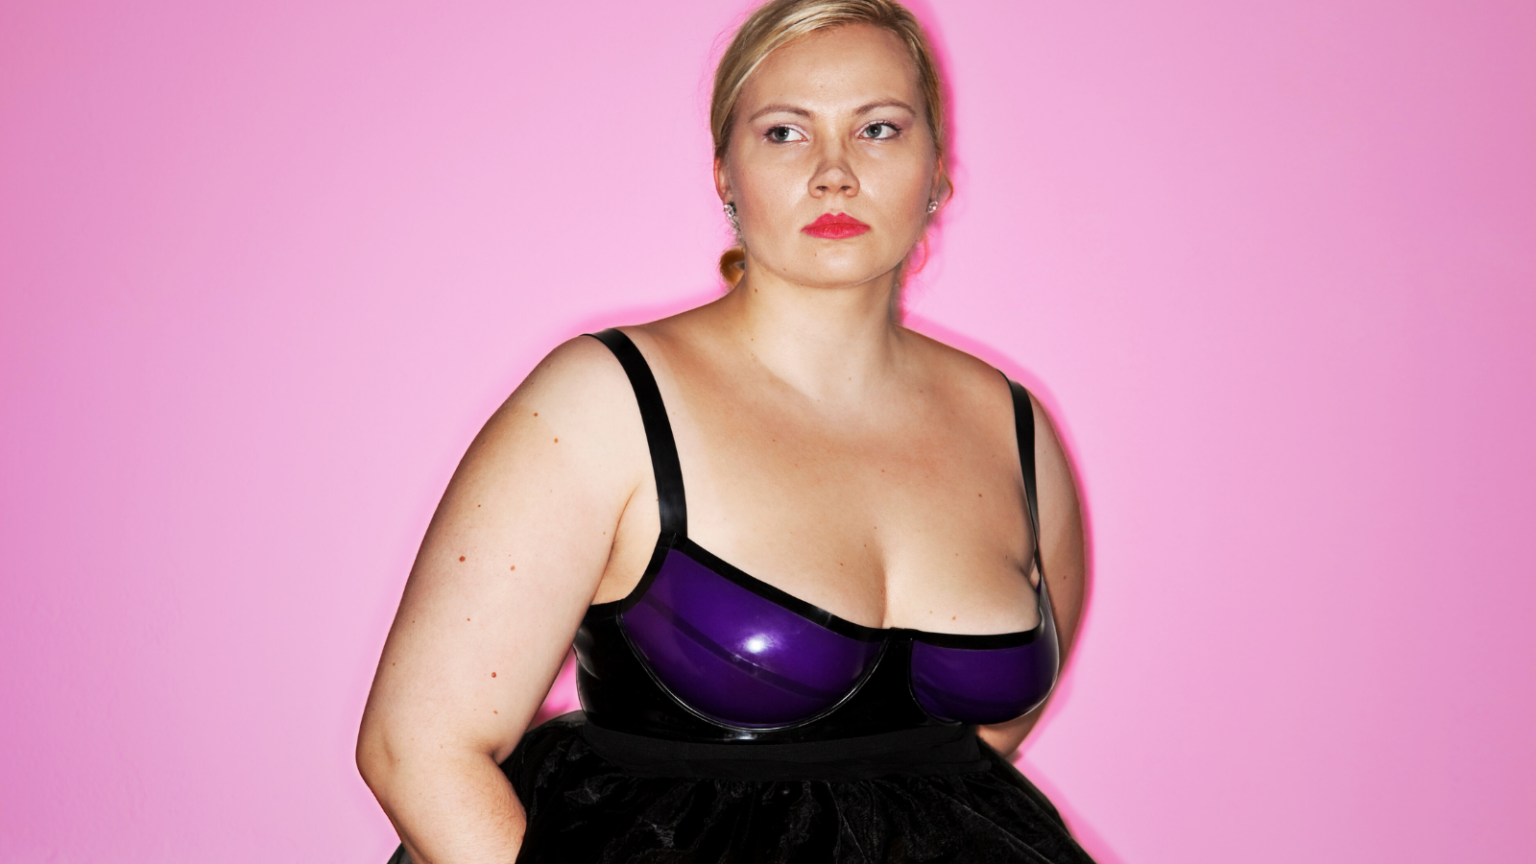 Photo of a feminine looking plus size person with light skin wearing a latex tank top